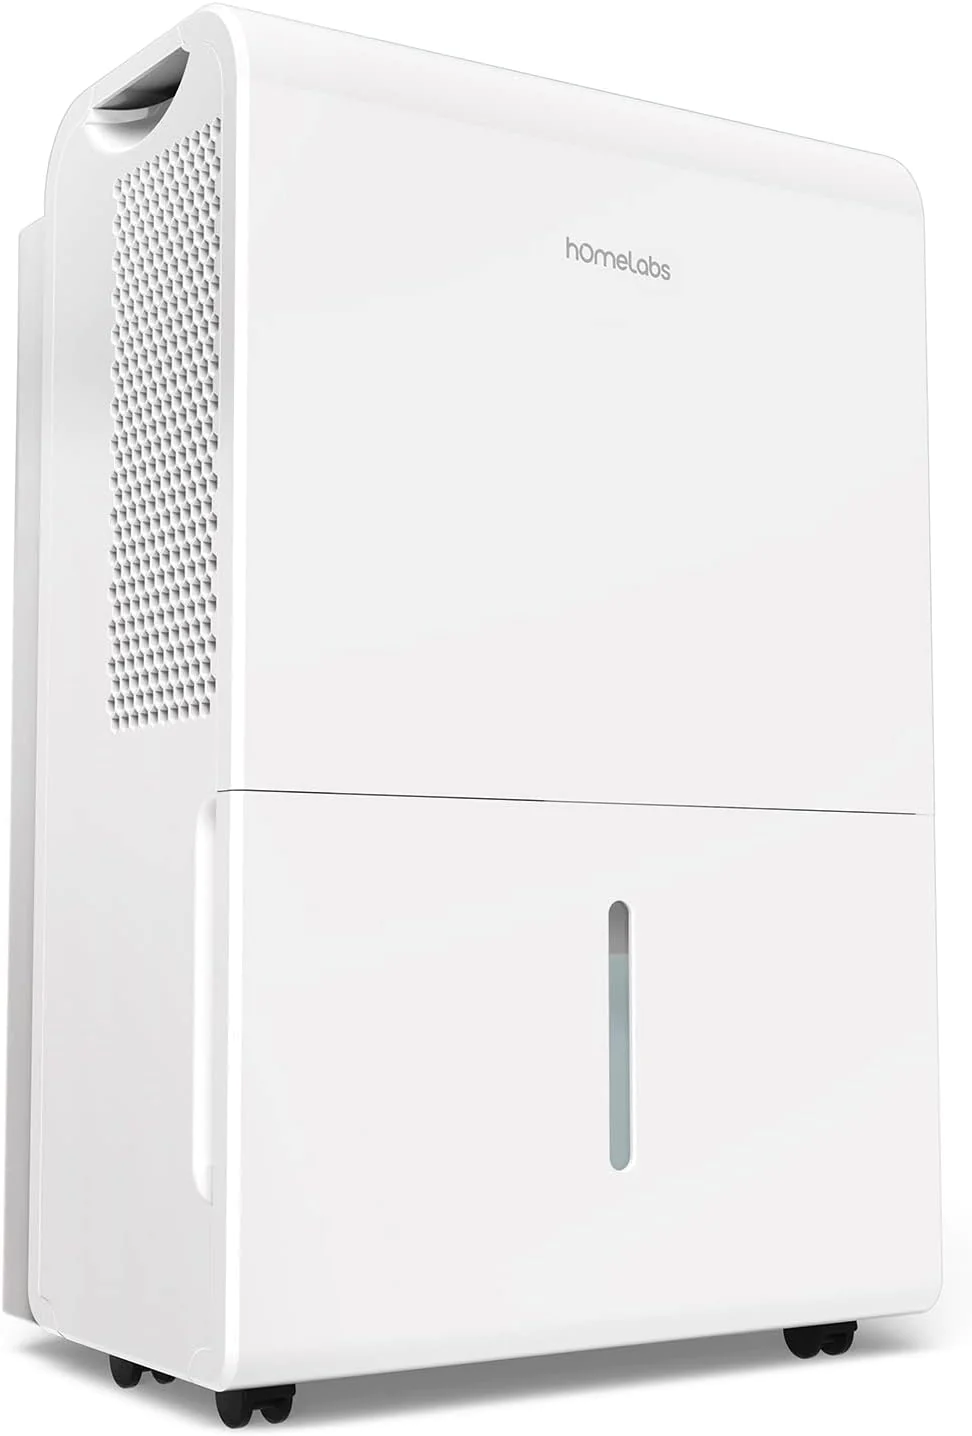 hOmeLabs 4500 Sq. Ft Energy Star Dehumidifier - Ideal for Large Rooms and Home Basements